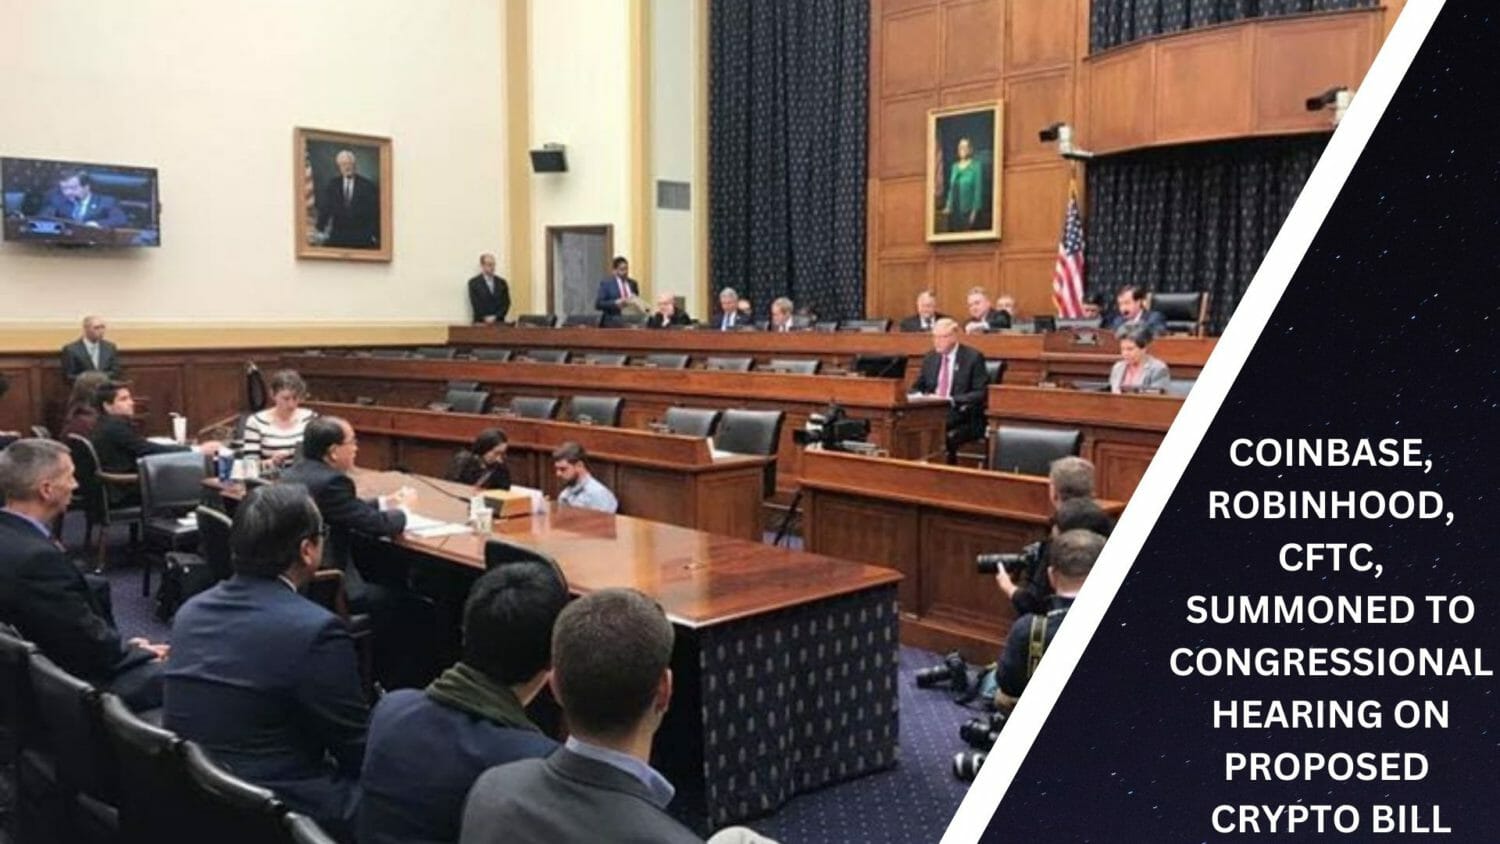 Coinbase, Robinhood, Cftc, Summoned To Congressional Hearing On Proposed Crypto Bill